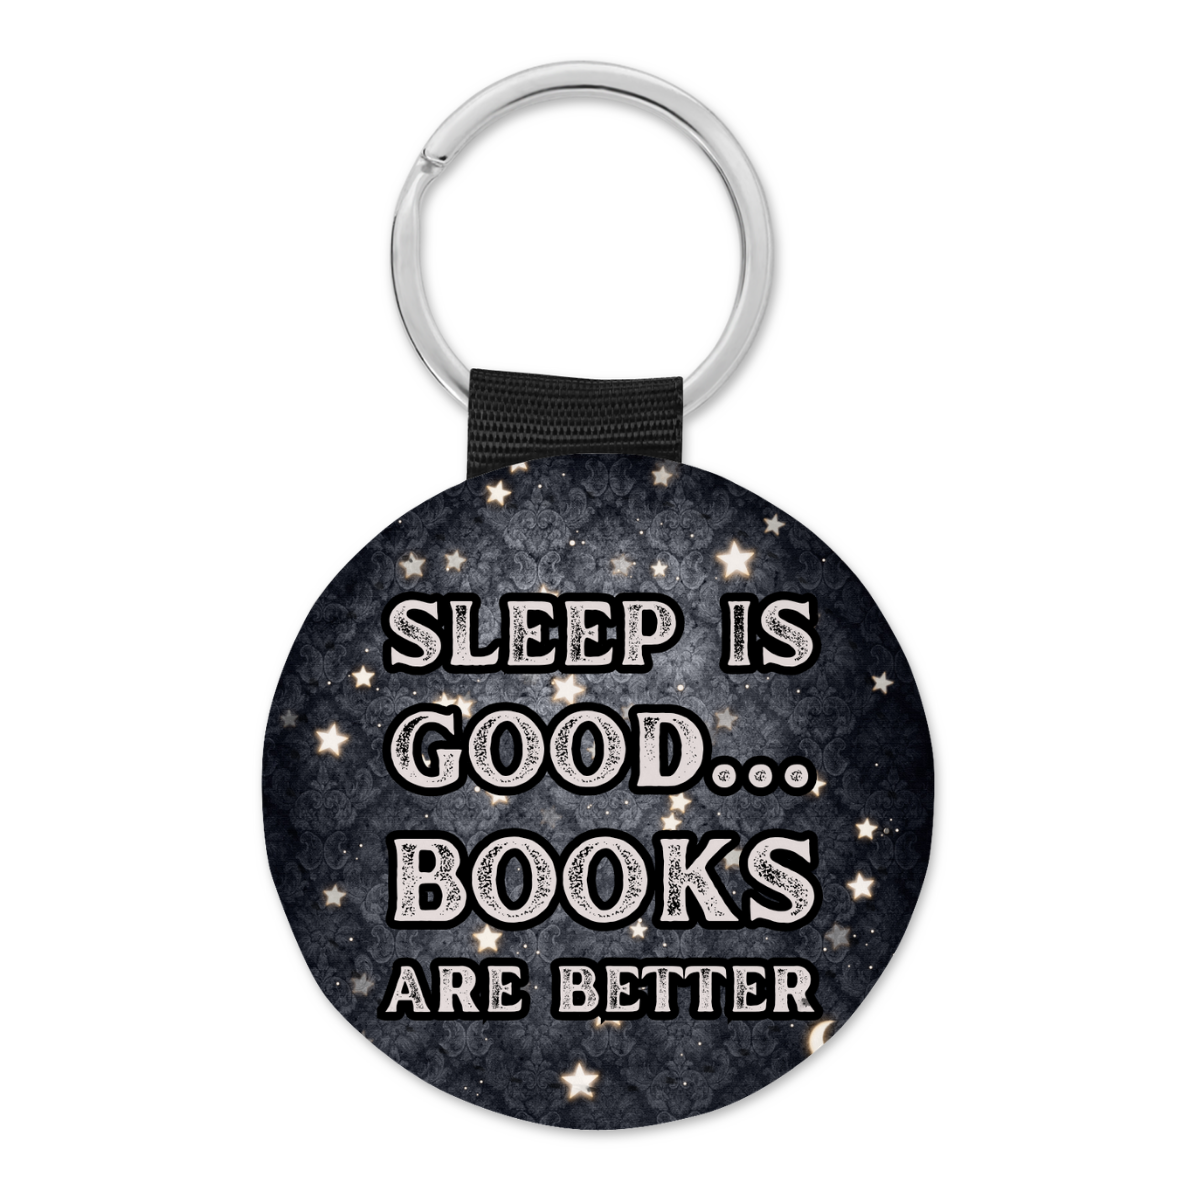 Books Are Better | Book Lovers Keyring - The Pretty Things.ca